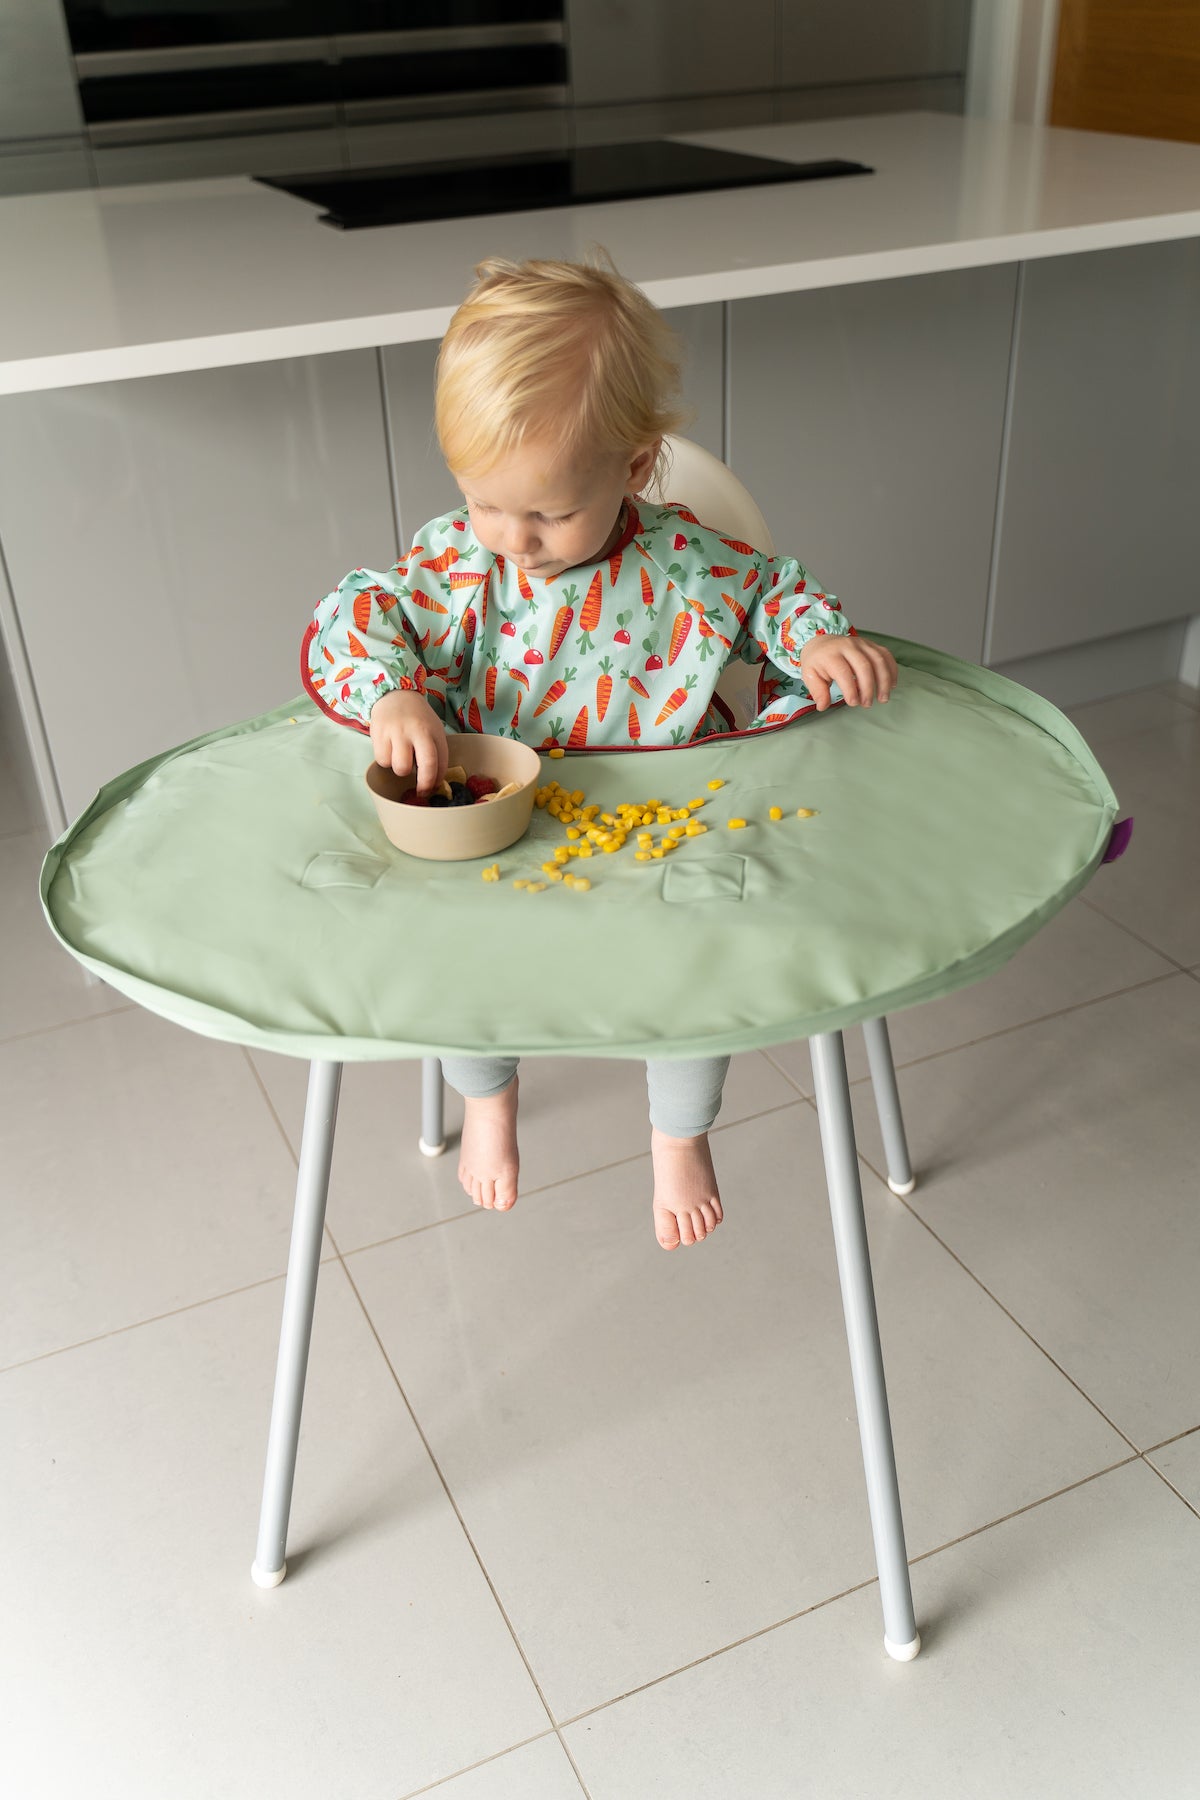 Tidy Tot - All in One Bib and Tray Kit 